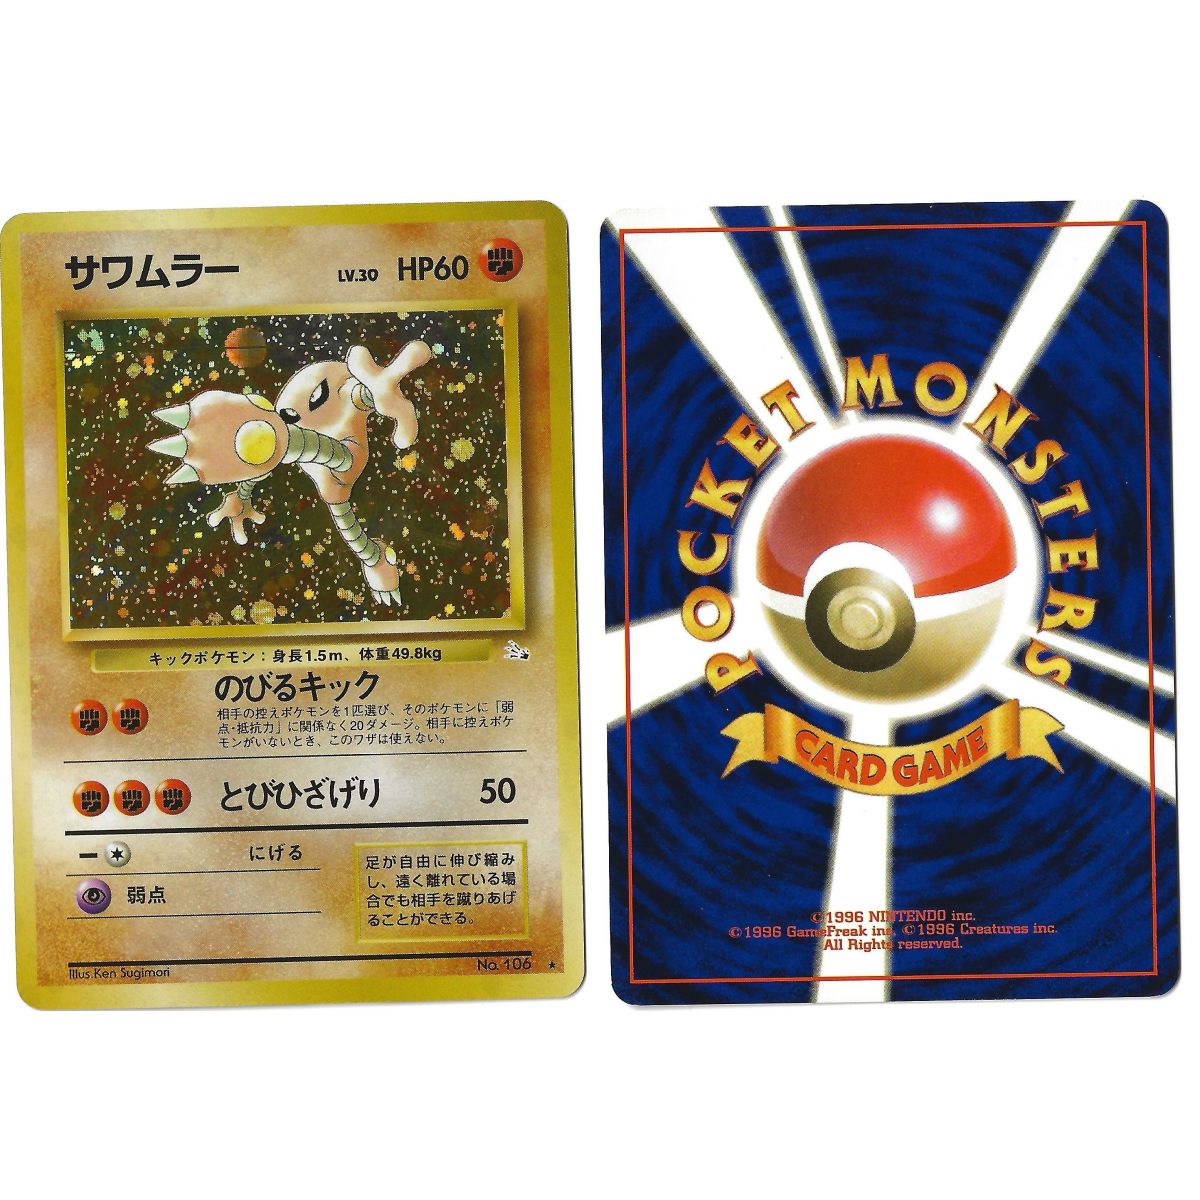 Hitmonlee (1) No.106 Mystery of the Fossils FO Holo Unlimited Japanese View Scan